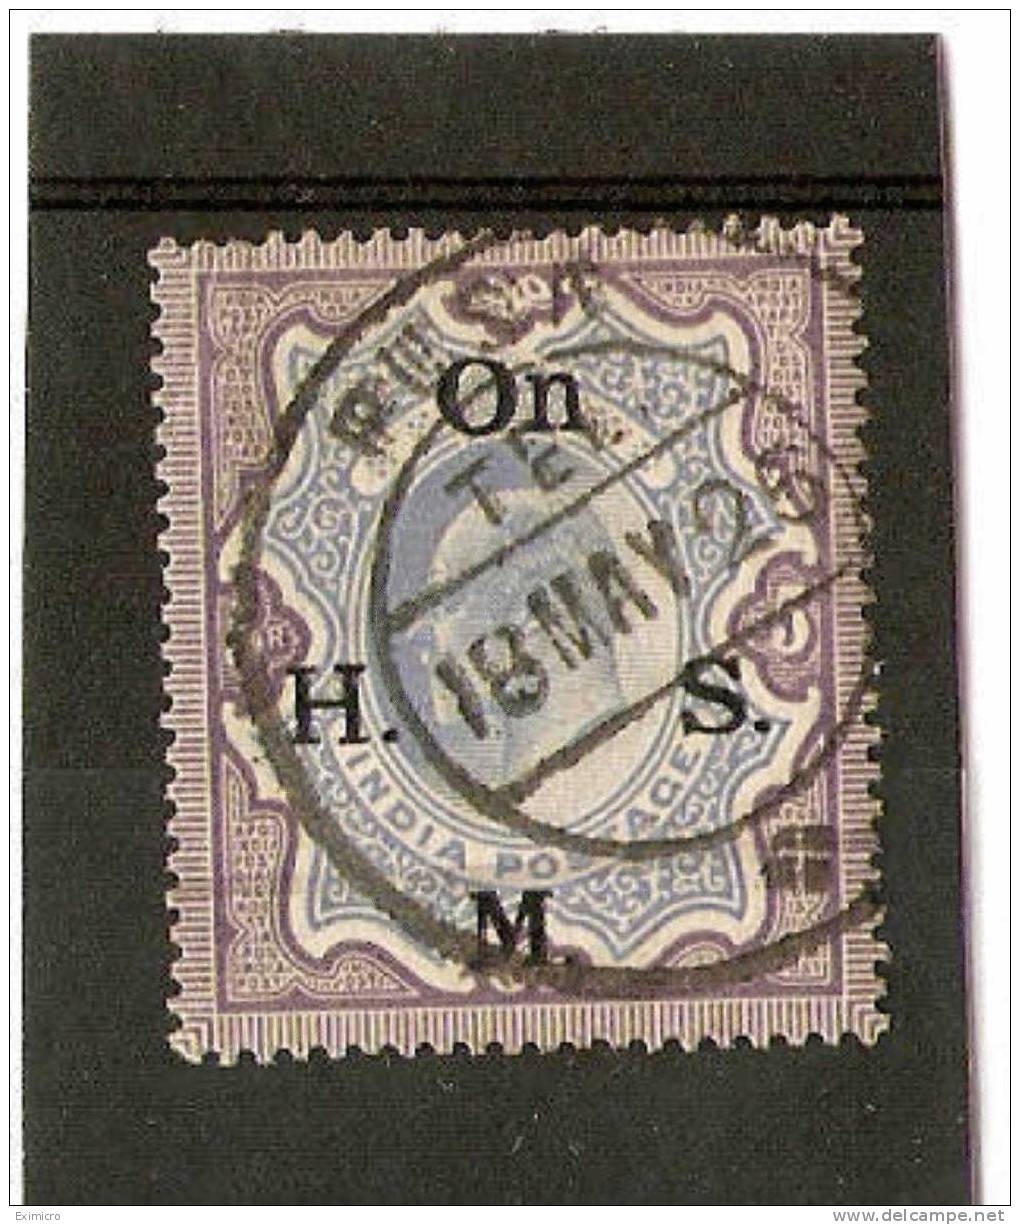 INDIA 1909 5R SG 069 FINE USED - Official Stamps